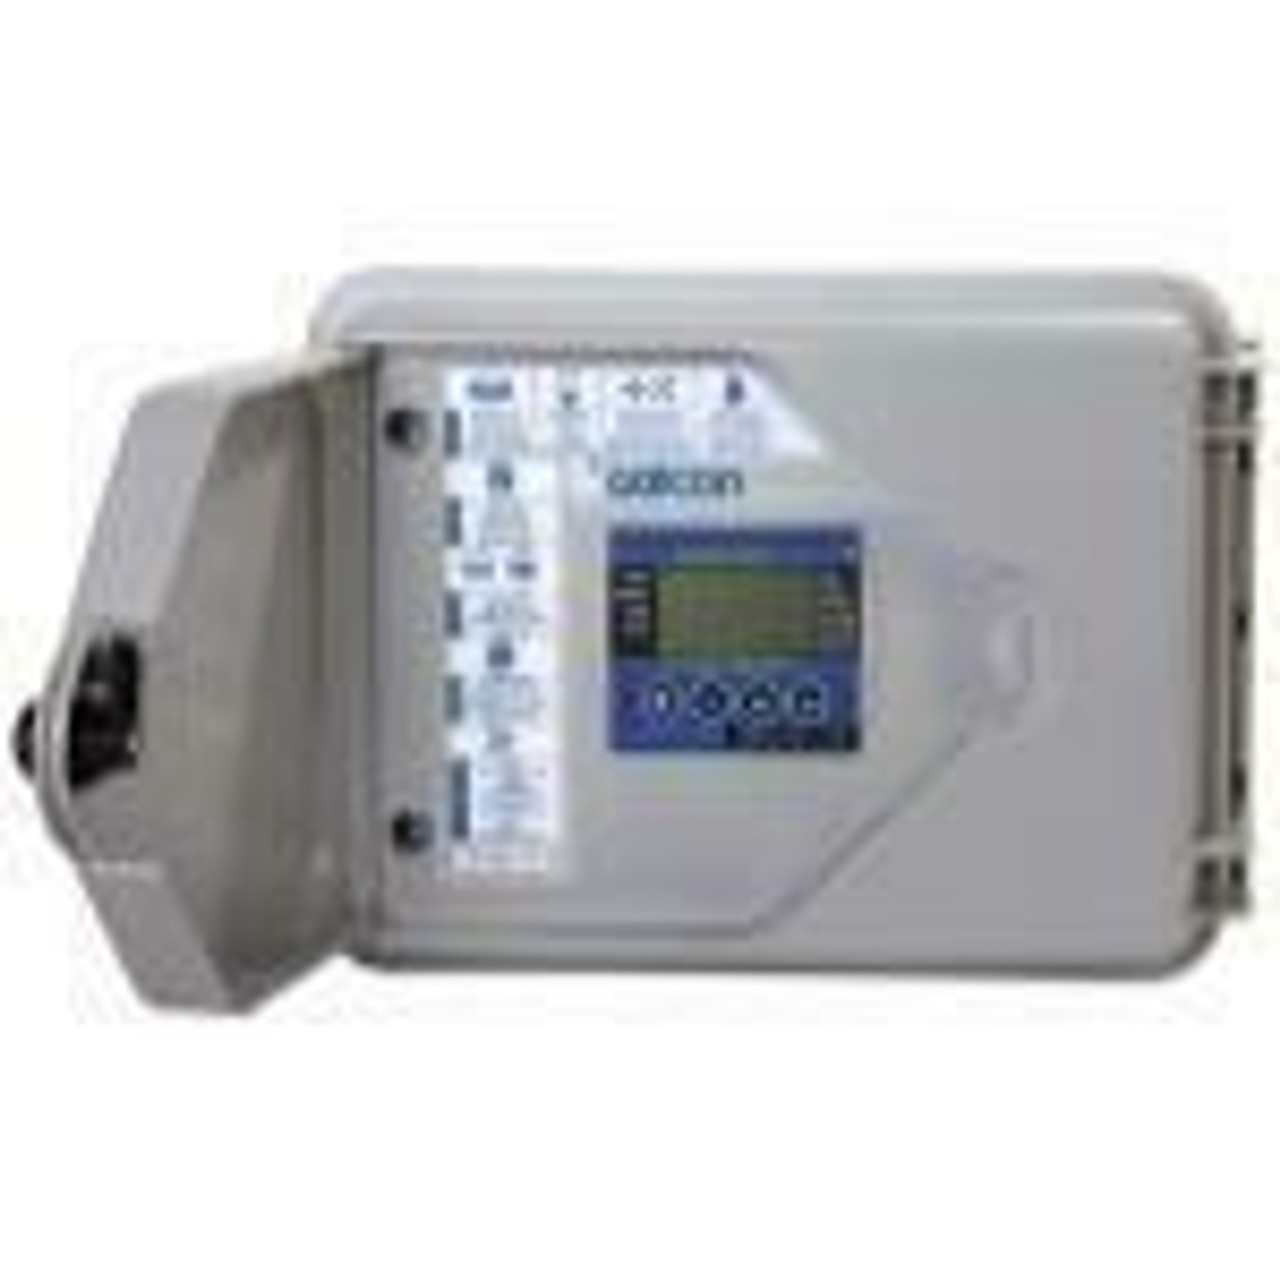 Galcon Twelve Station Outdoor Wall Mount Irrigation, Misting and Propagation Controller - 80512S (AC-12S) - 1